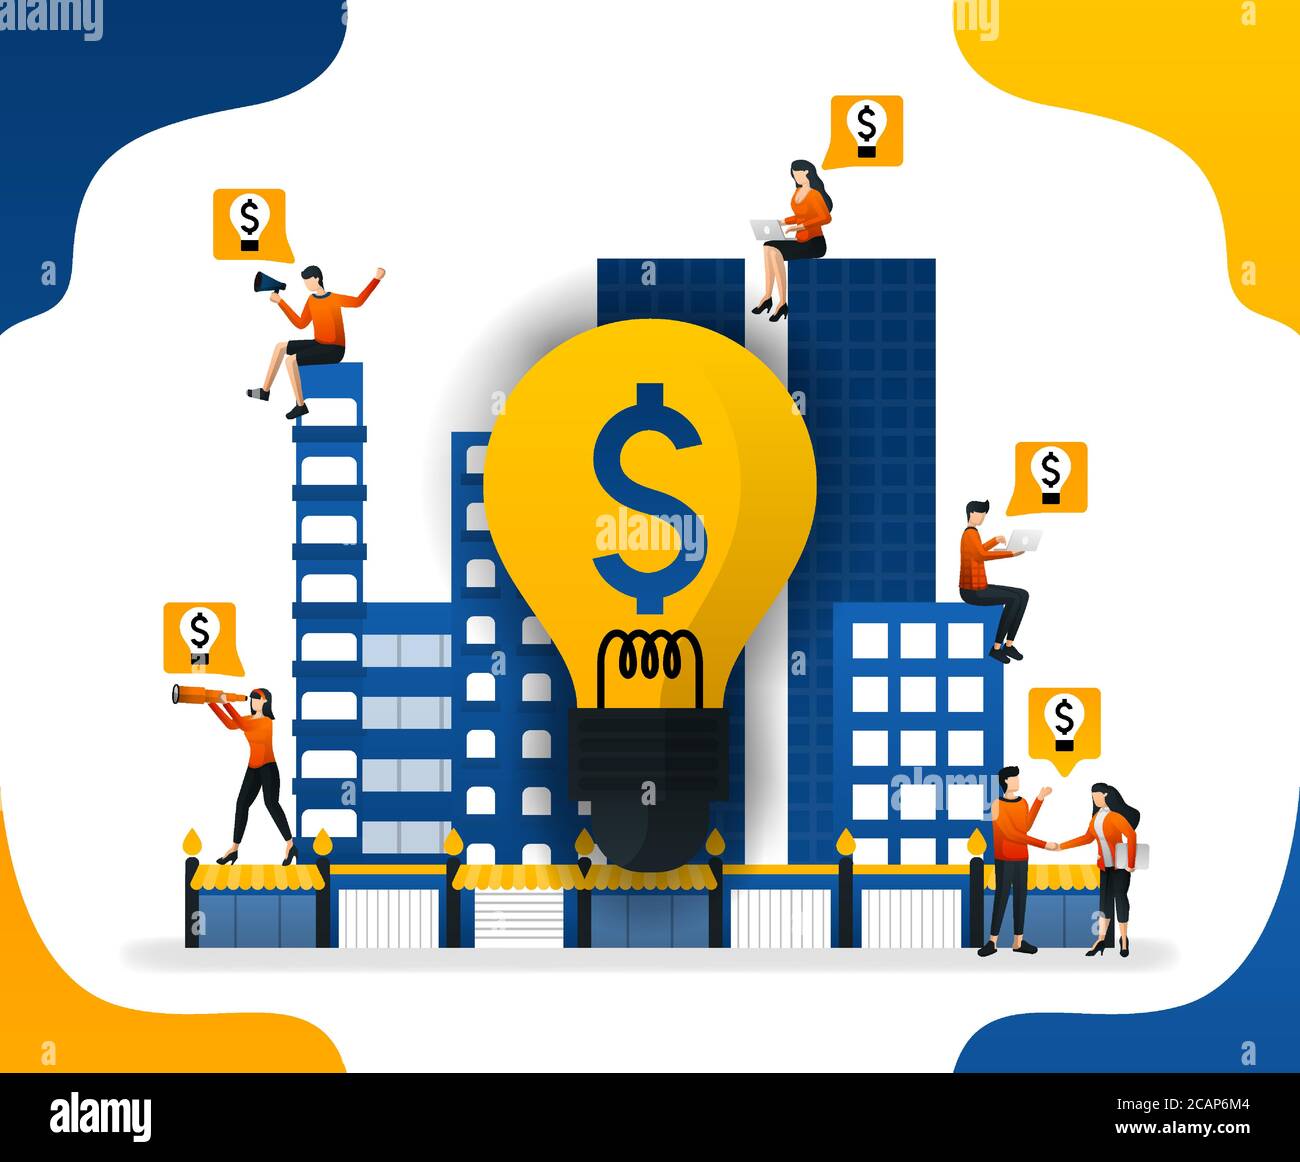 Idea to build a smart city. creating a financial system in the city, concept vector ilustration. can use for landing page, template, ui, web, mobile a Stock Vector